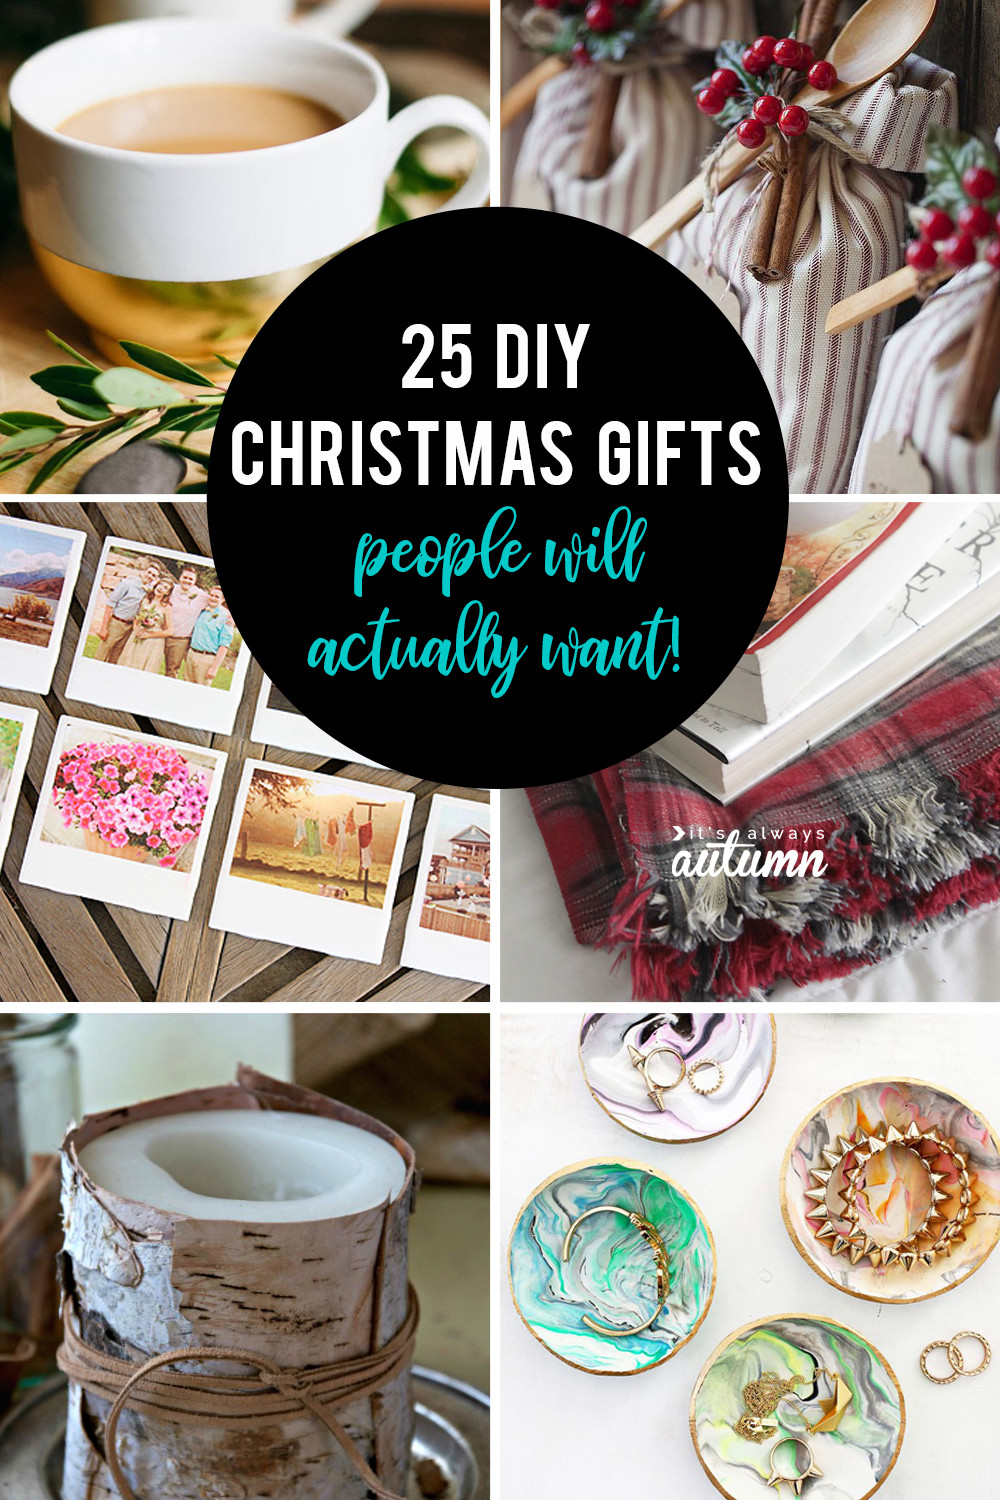 DIY Holiday Gift Ideas
 25 amazing DIY ts people will actually want It s